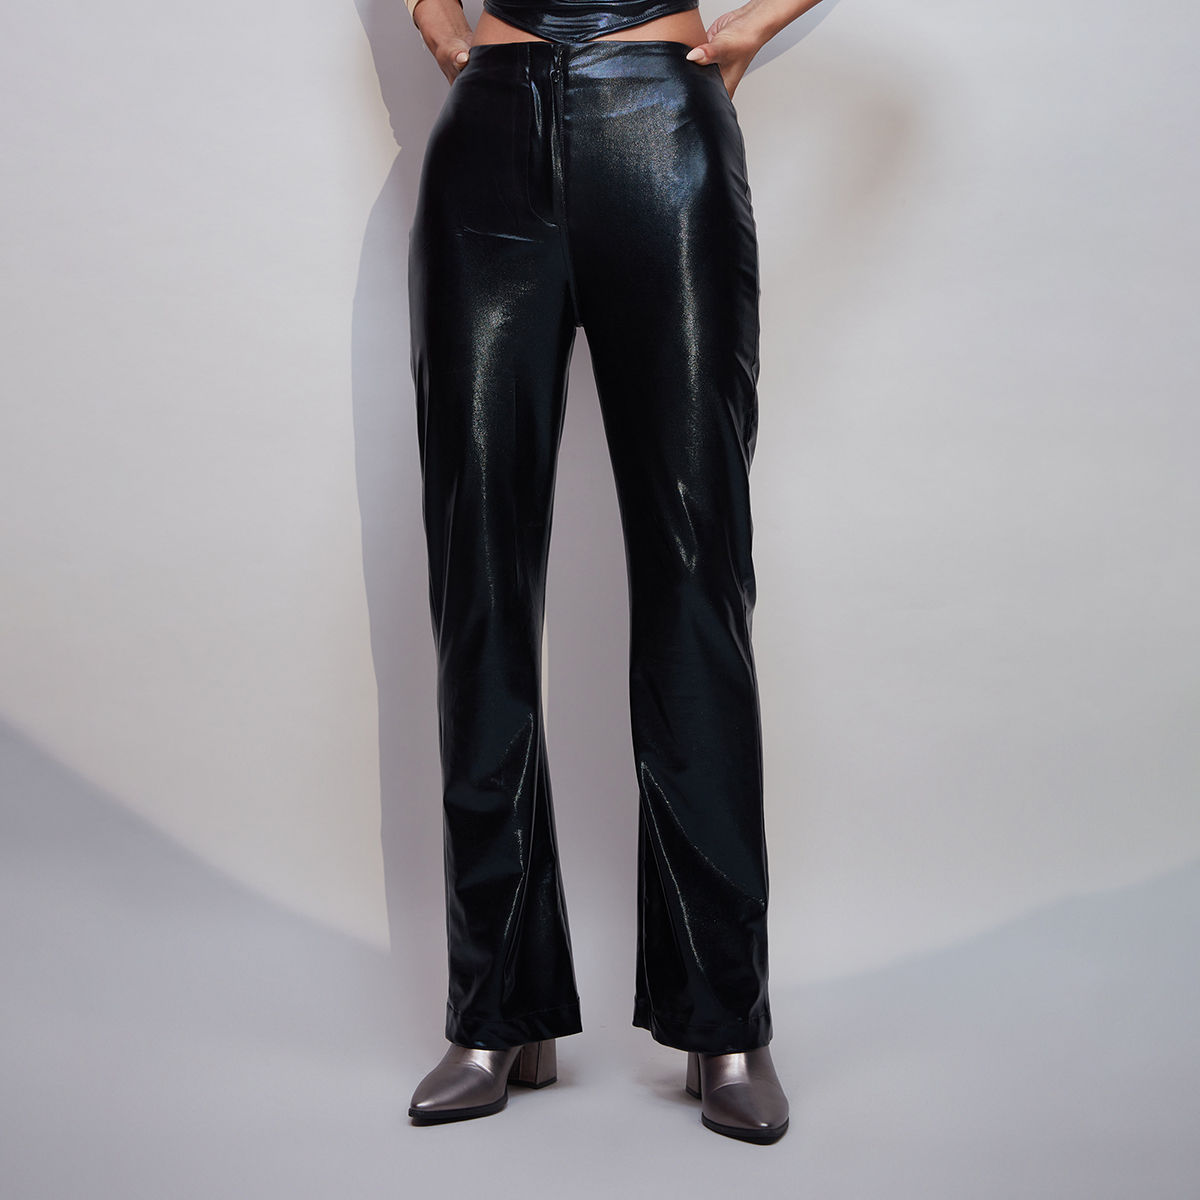 Buy Women Lilac Paperbag High Waist Belted Trousers  Trends Online India   FabAlley